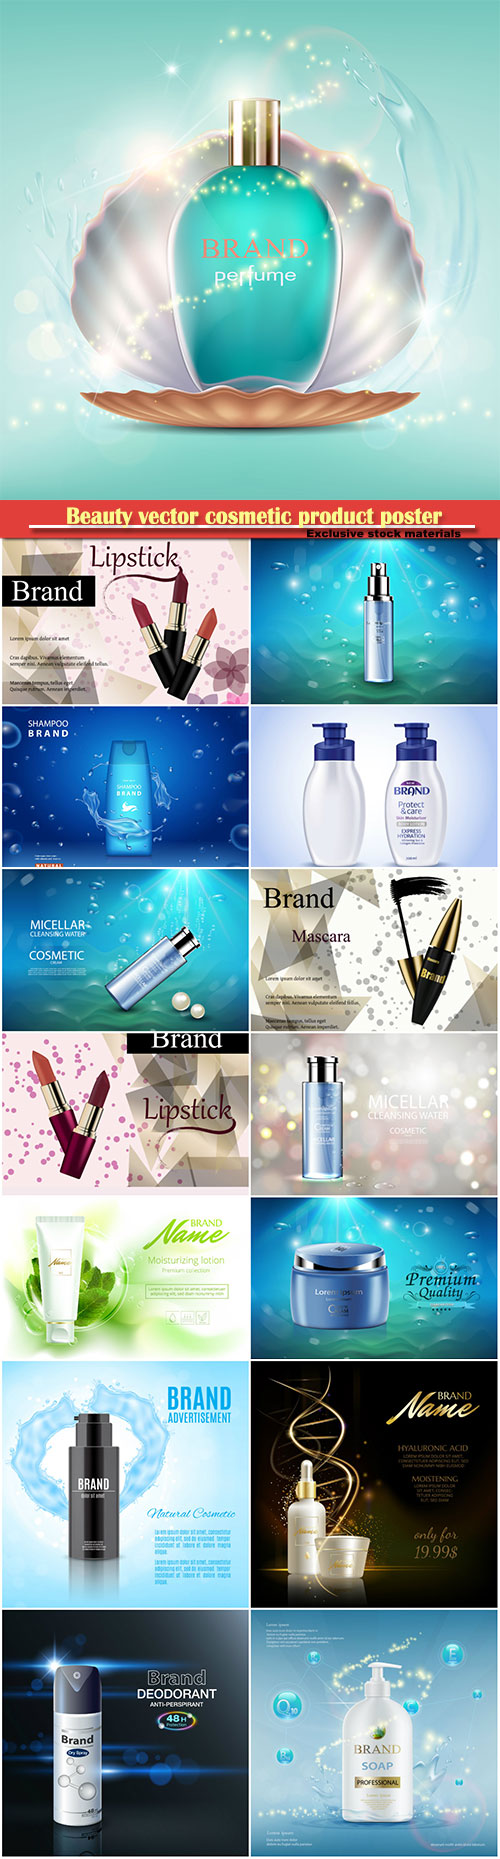 Beauty vector cosmetic product poster # 30